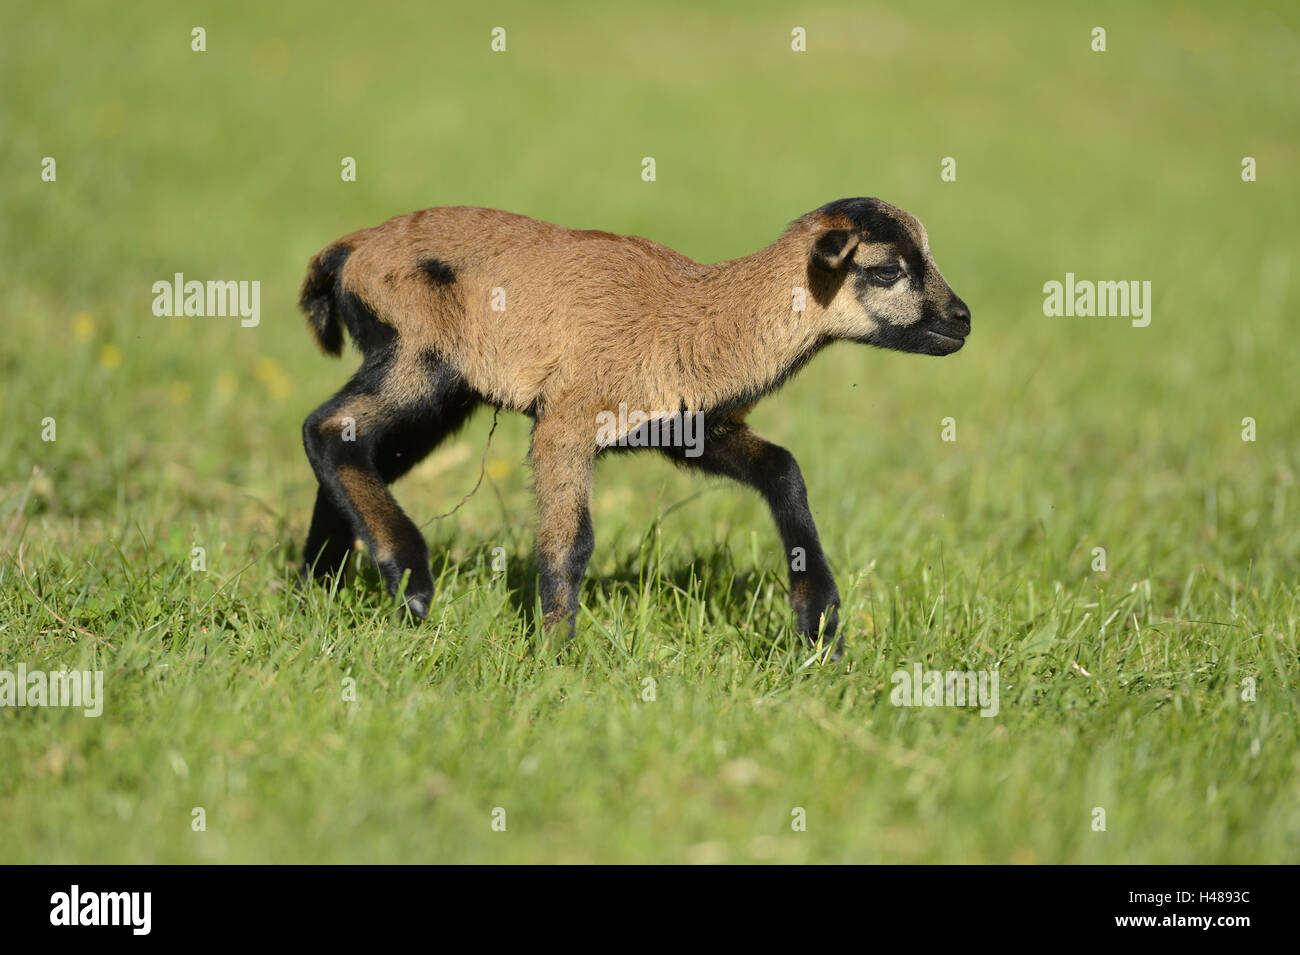 Cameroon sheep, lamb, meadow, side view, running, Stock Photo